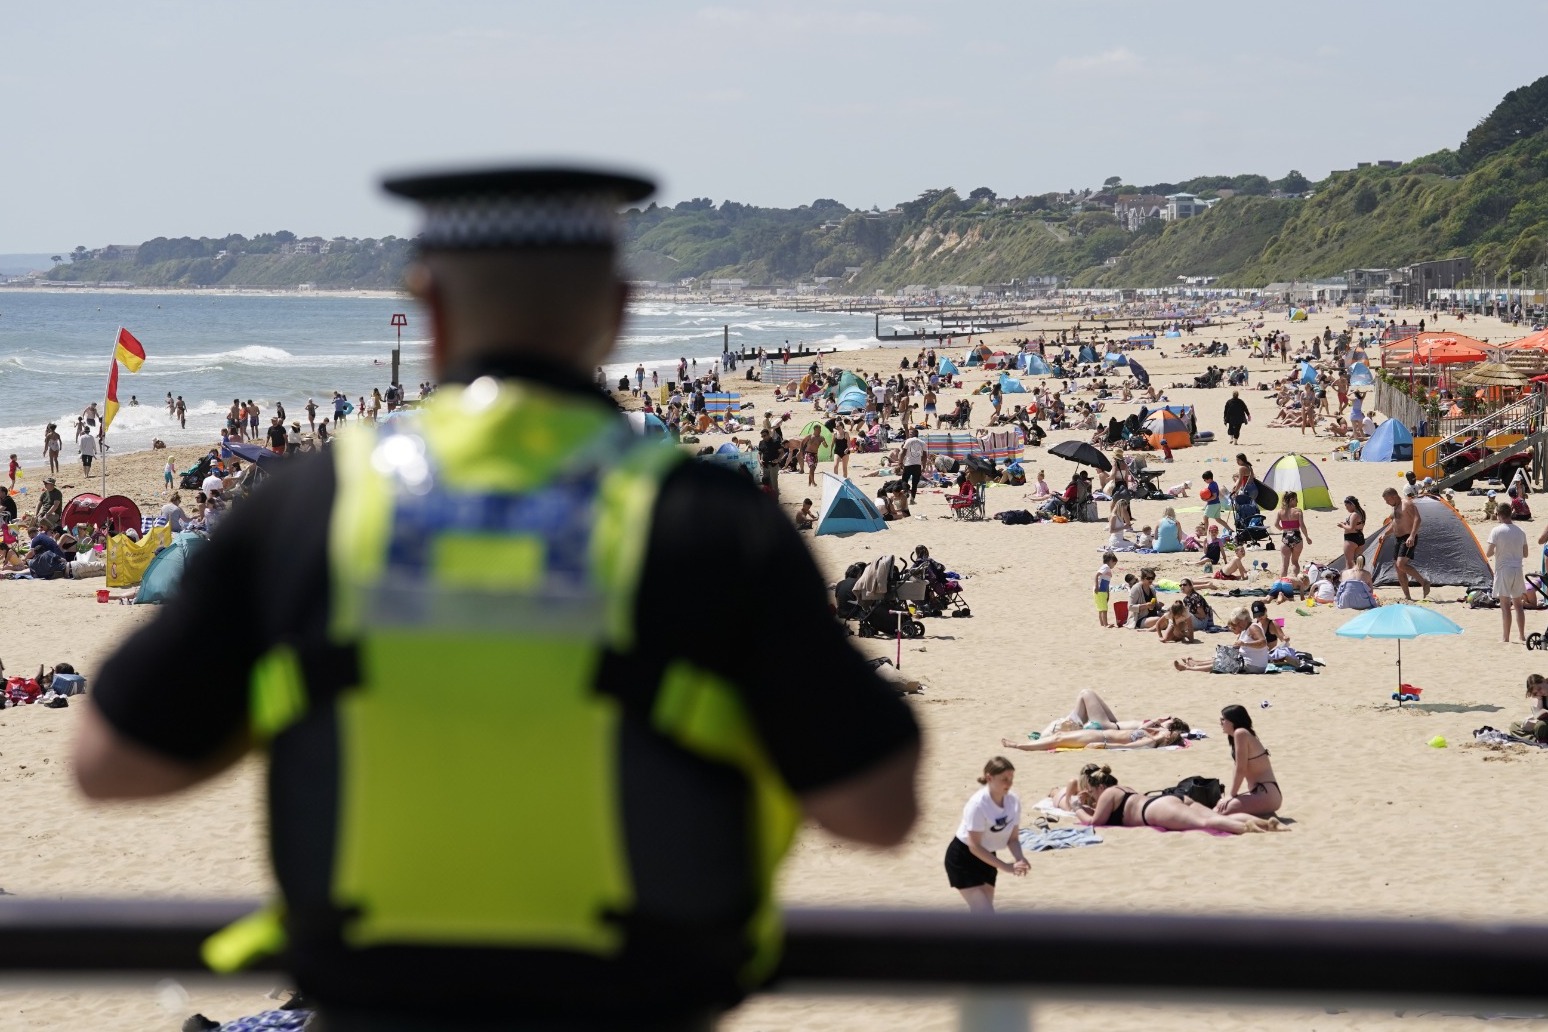 Bournemouth youngsters died from drowning, inquest hears 